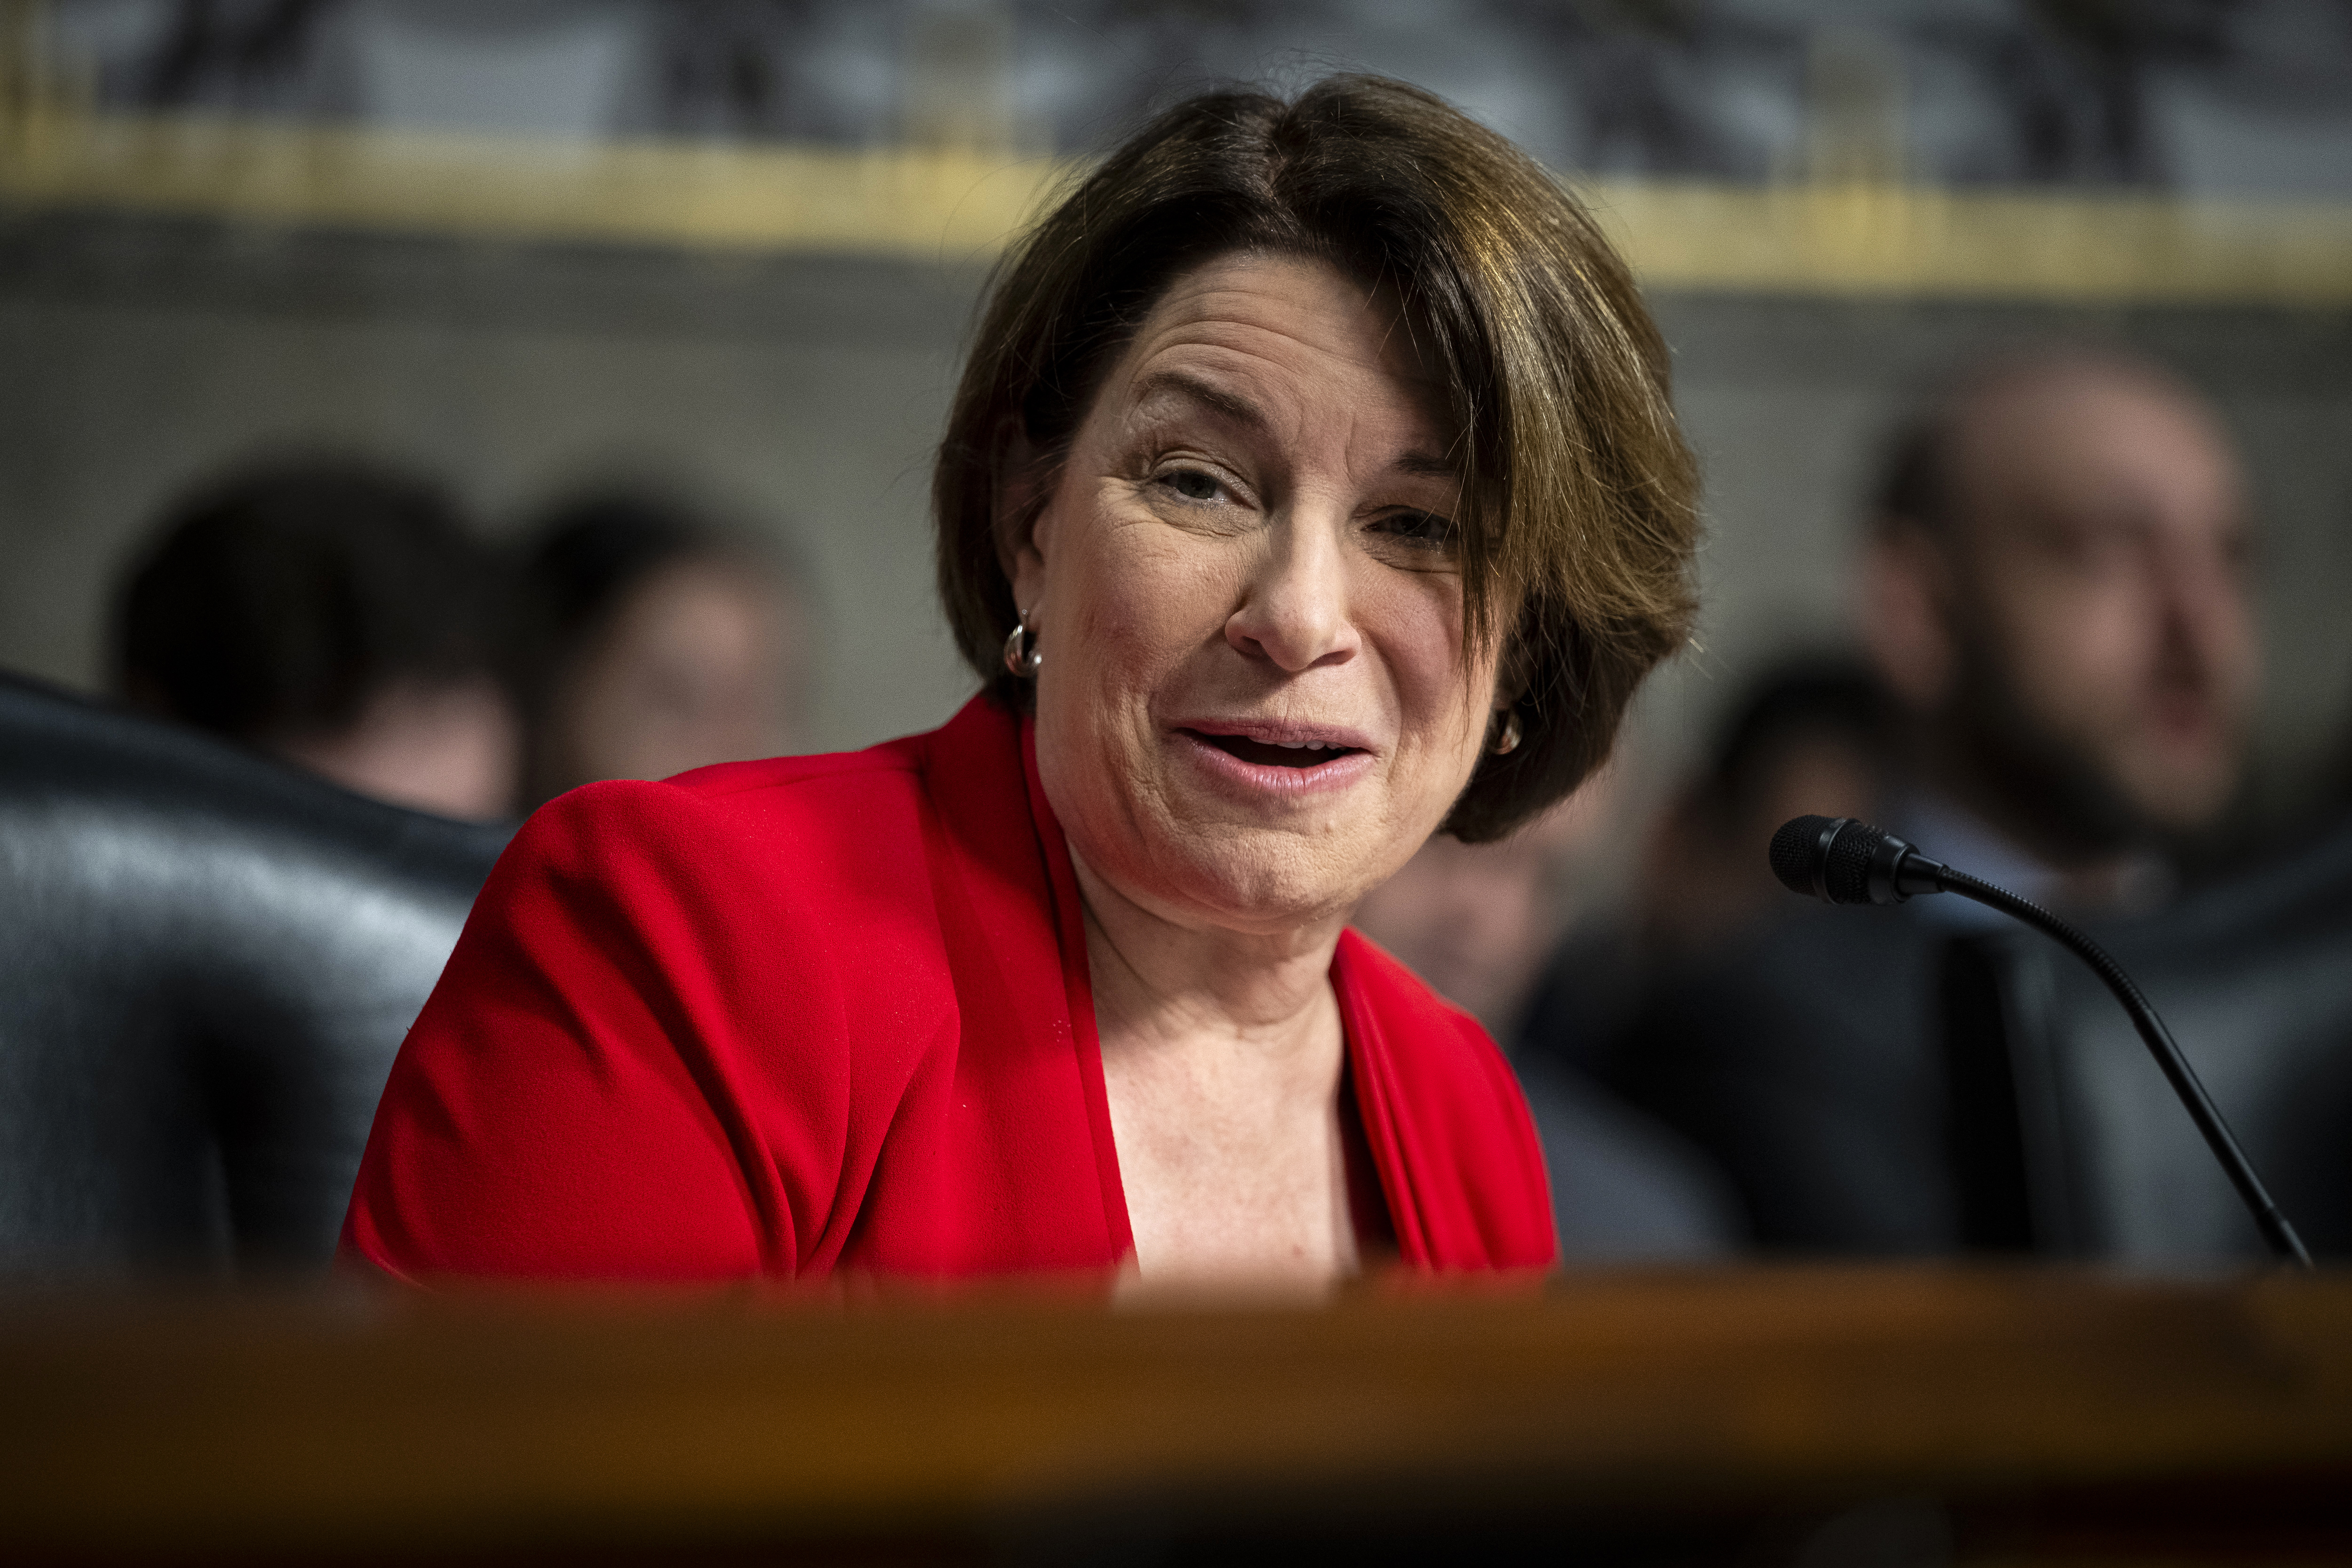 Sen. Amy Klobuchar speaks during a hearing at the Capitol in Washington, DC, on January 31.